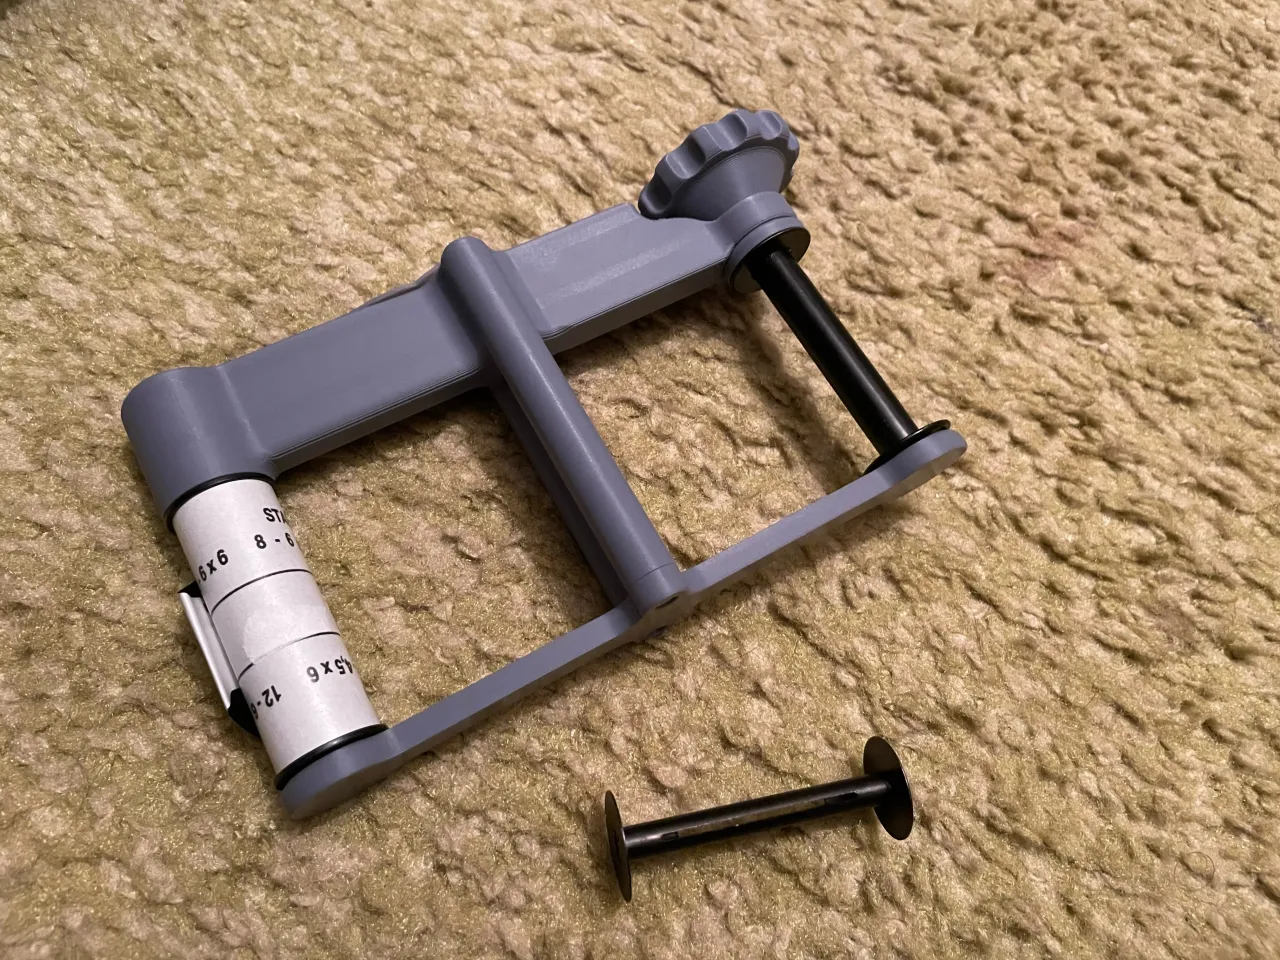 Re-spooling Tool for 620 Film by TheAlbinoGiraffe